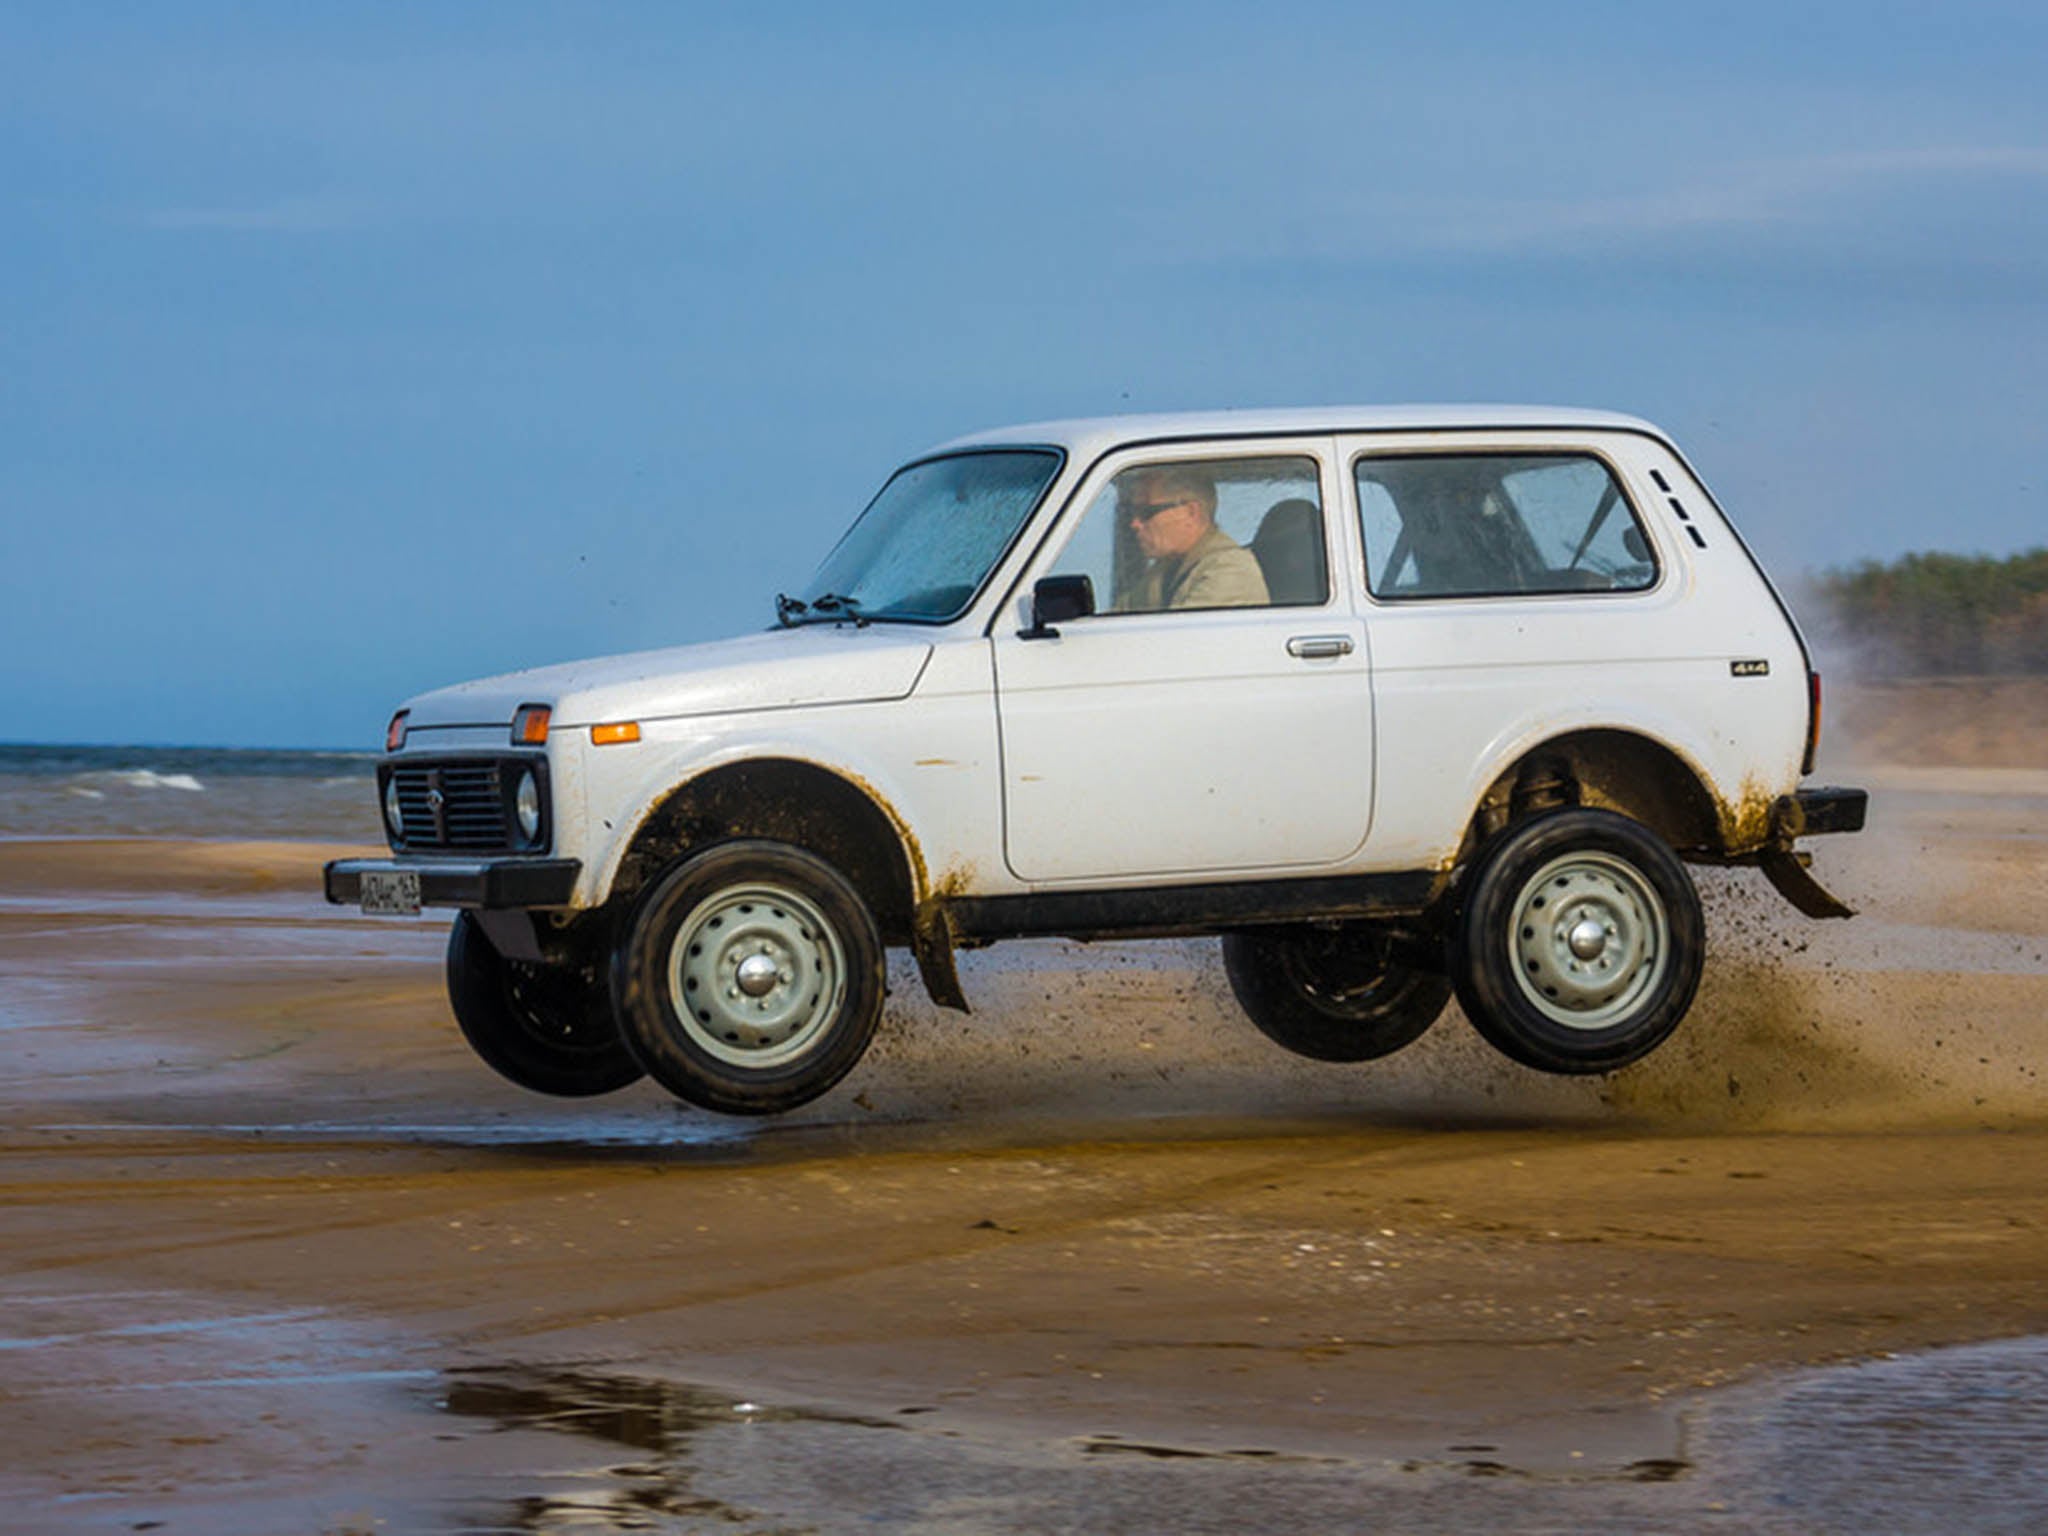 The rugged Lada Niva first took to the road in 1977 – and 40 years on it’s still going strong